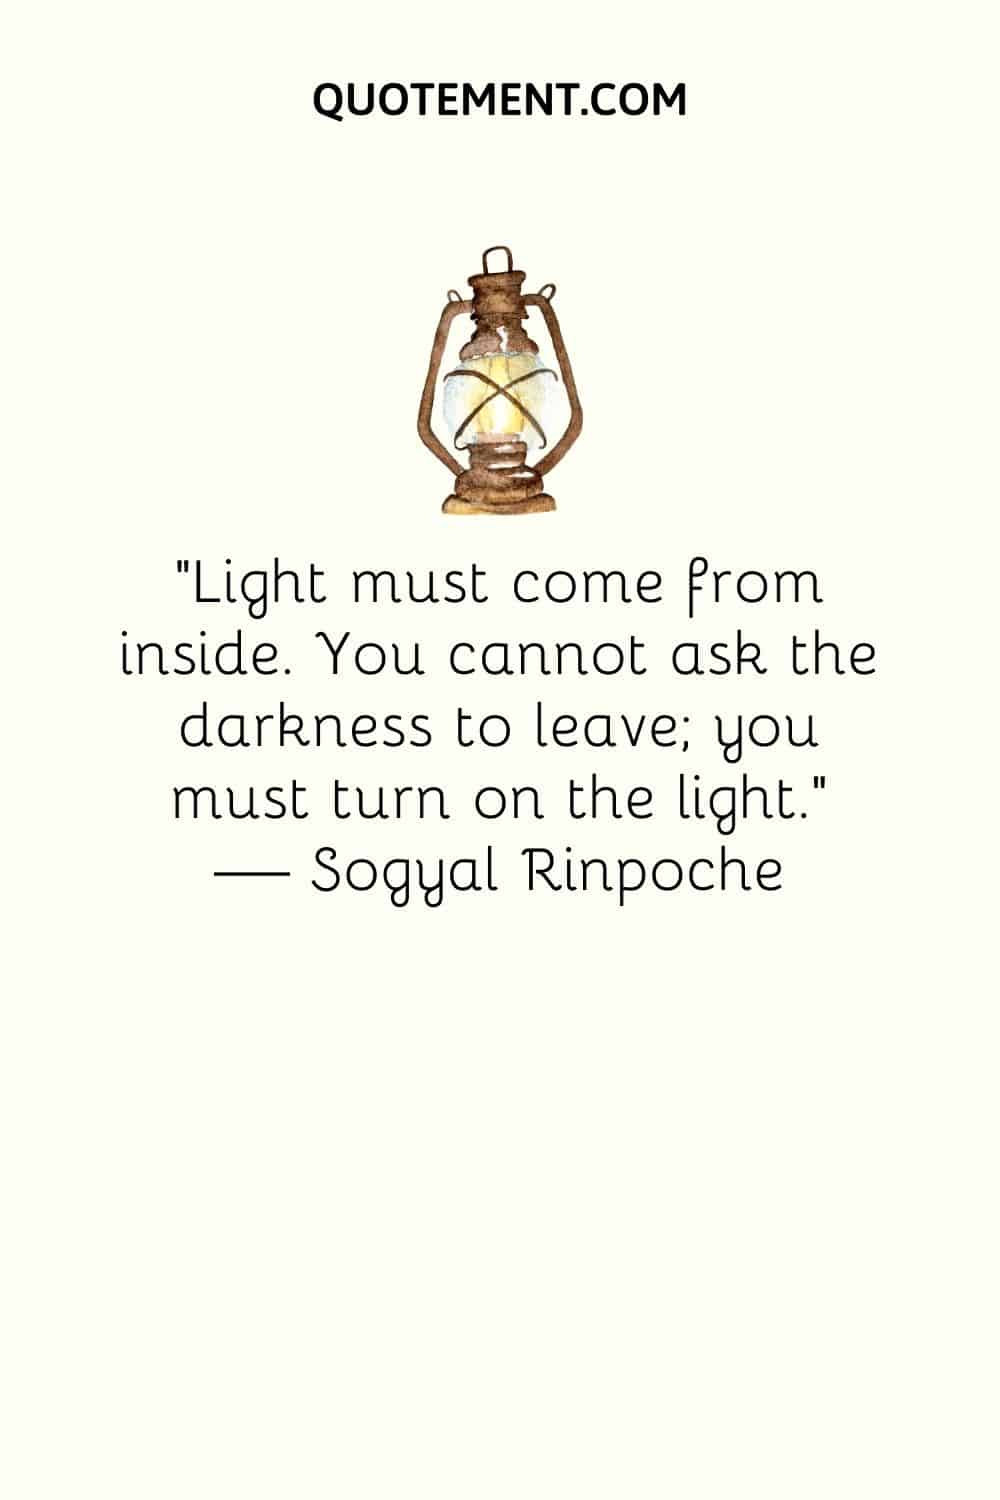 “Light must come from inside. You cannot ask the darkness to leave; you must turn on the light.” — Sogyal Rinpoche